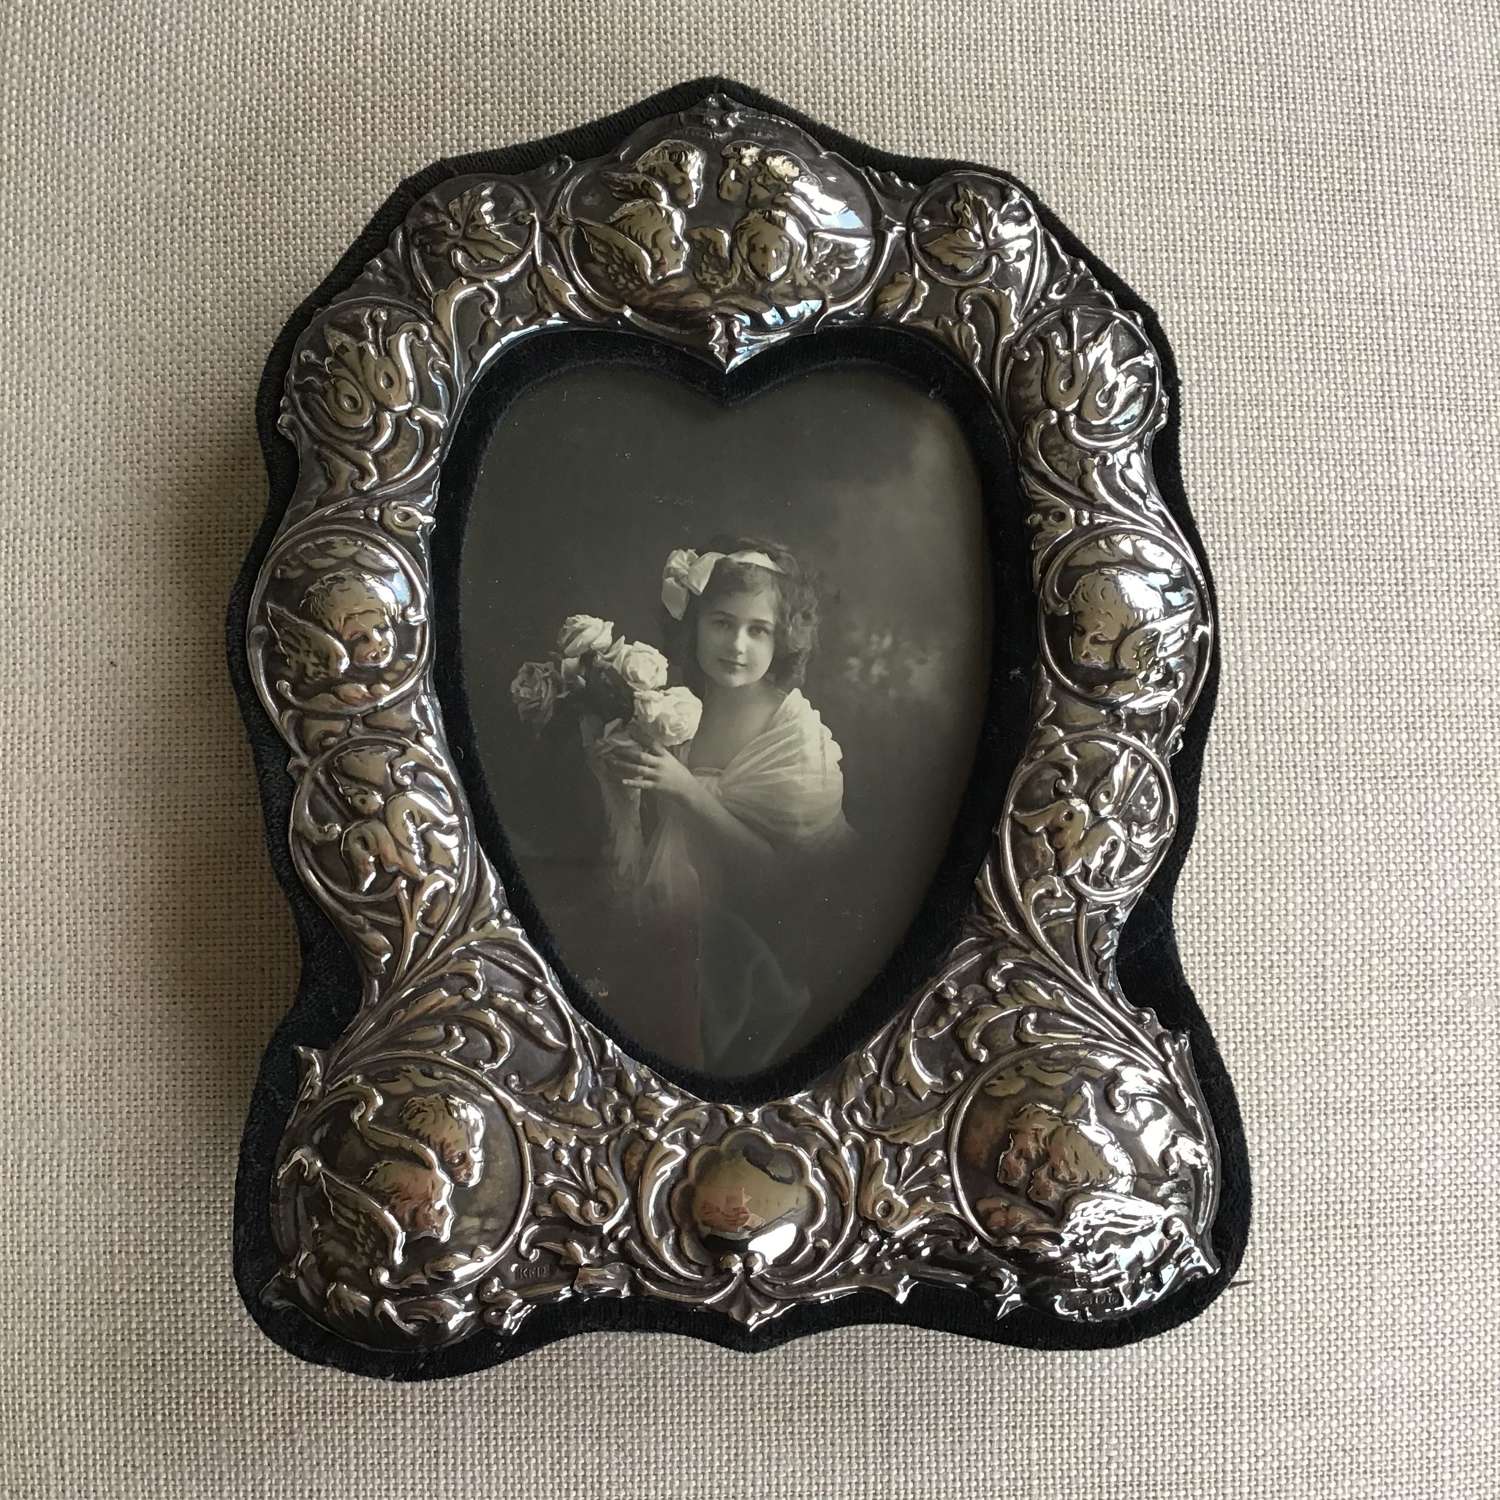 H/M Silver cherub frame with heart shaped glass aperture